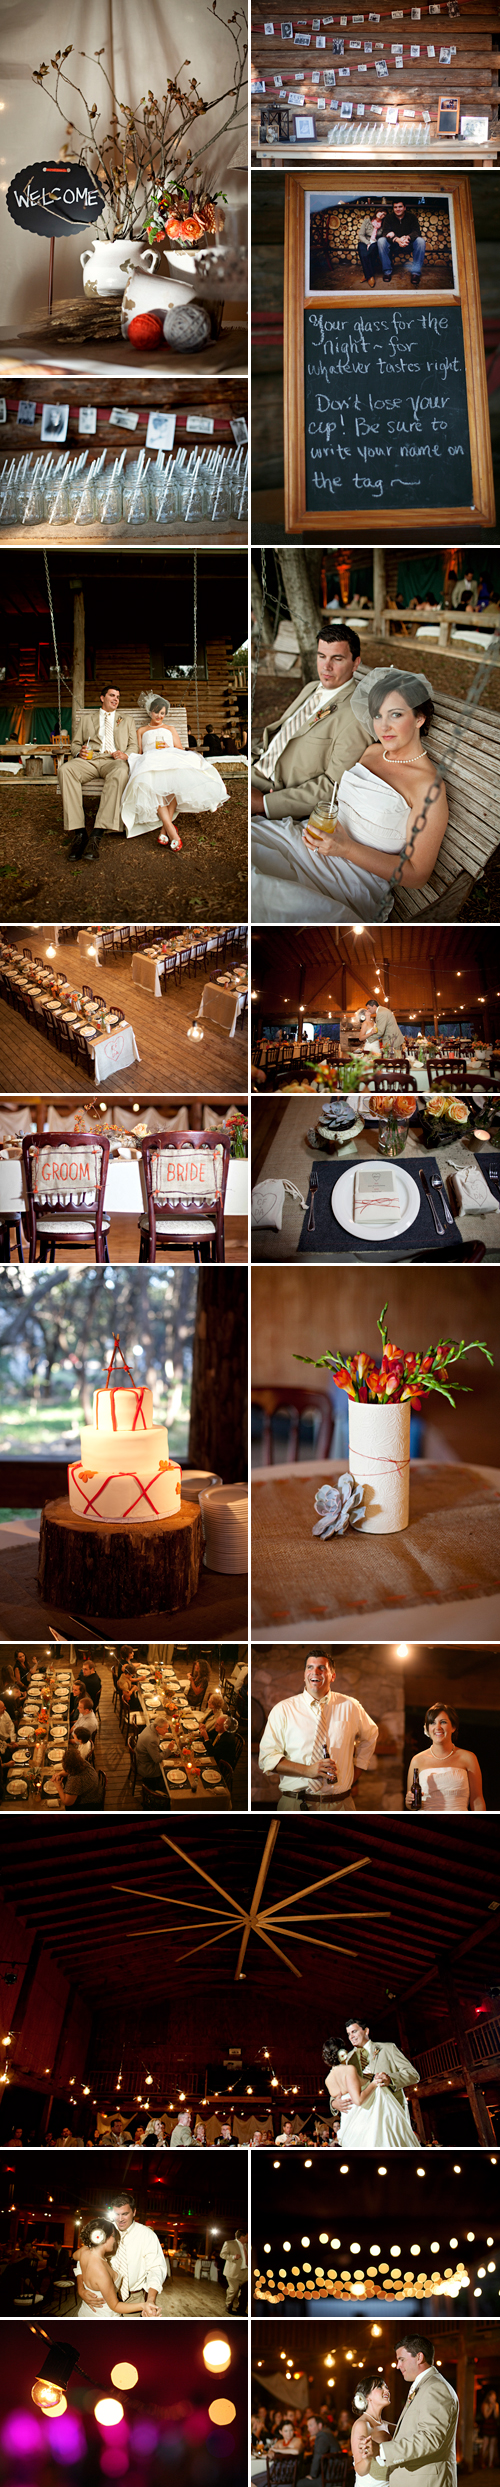 rustic texas wedding at the T Bar M Resort, wedding photos by ee Photography